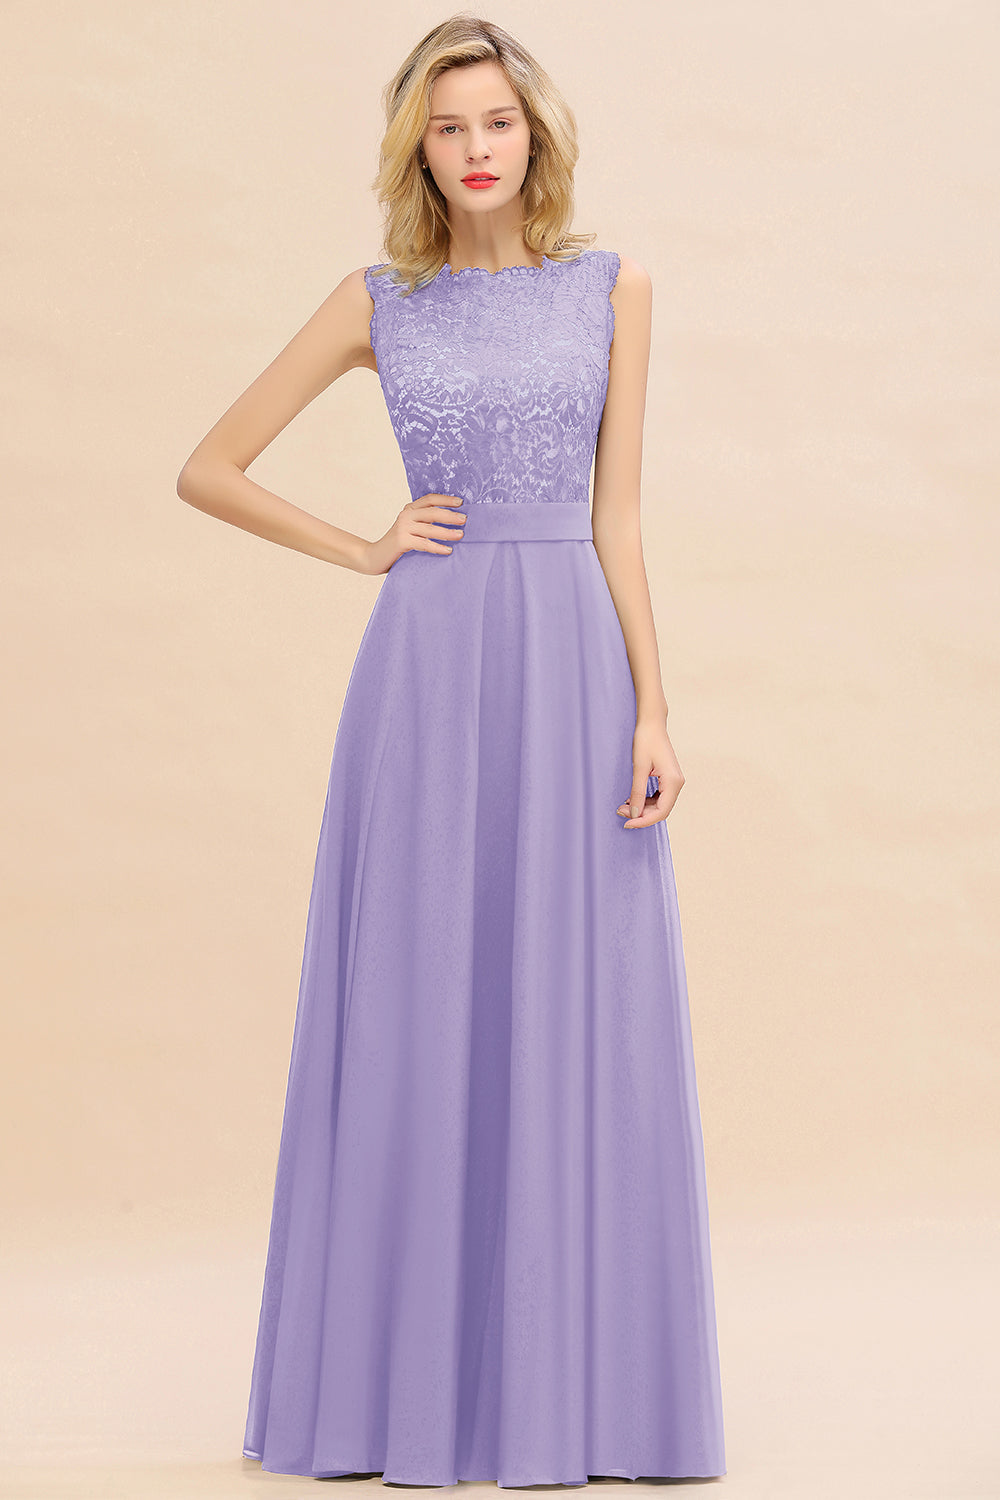 Exquisite Scoop Chiffon Lace Bridesmaid Dresses with V-Back-27dress